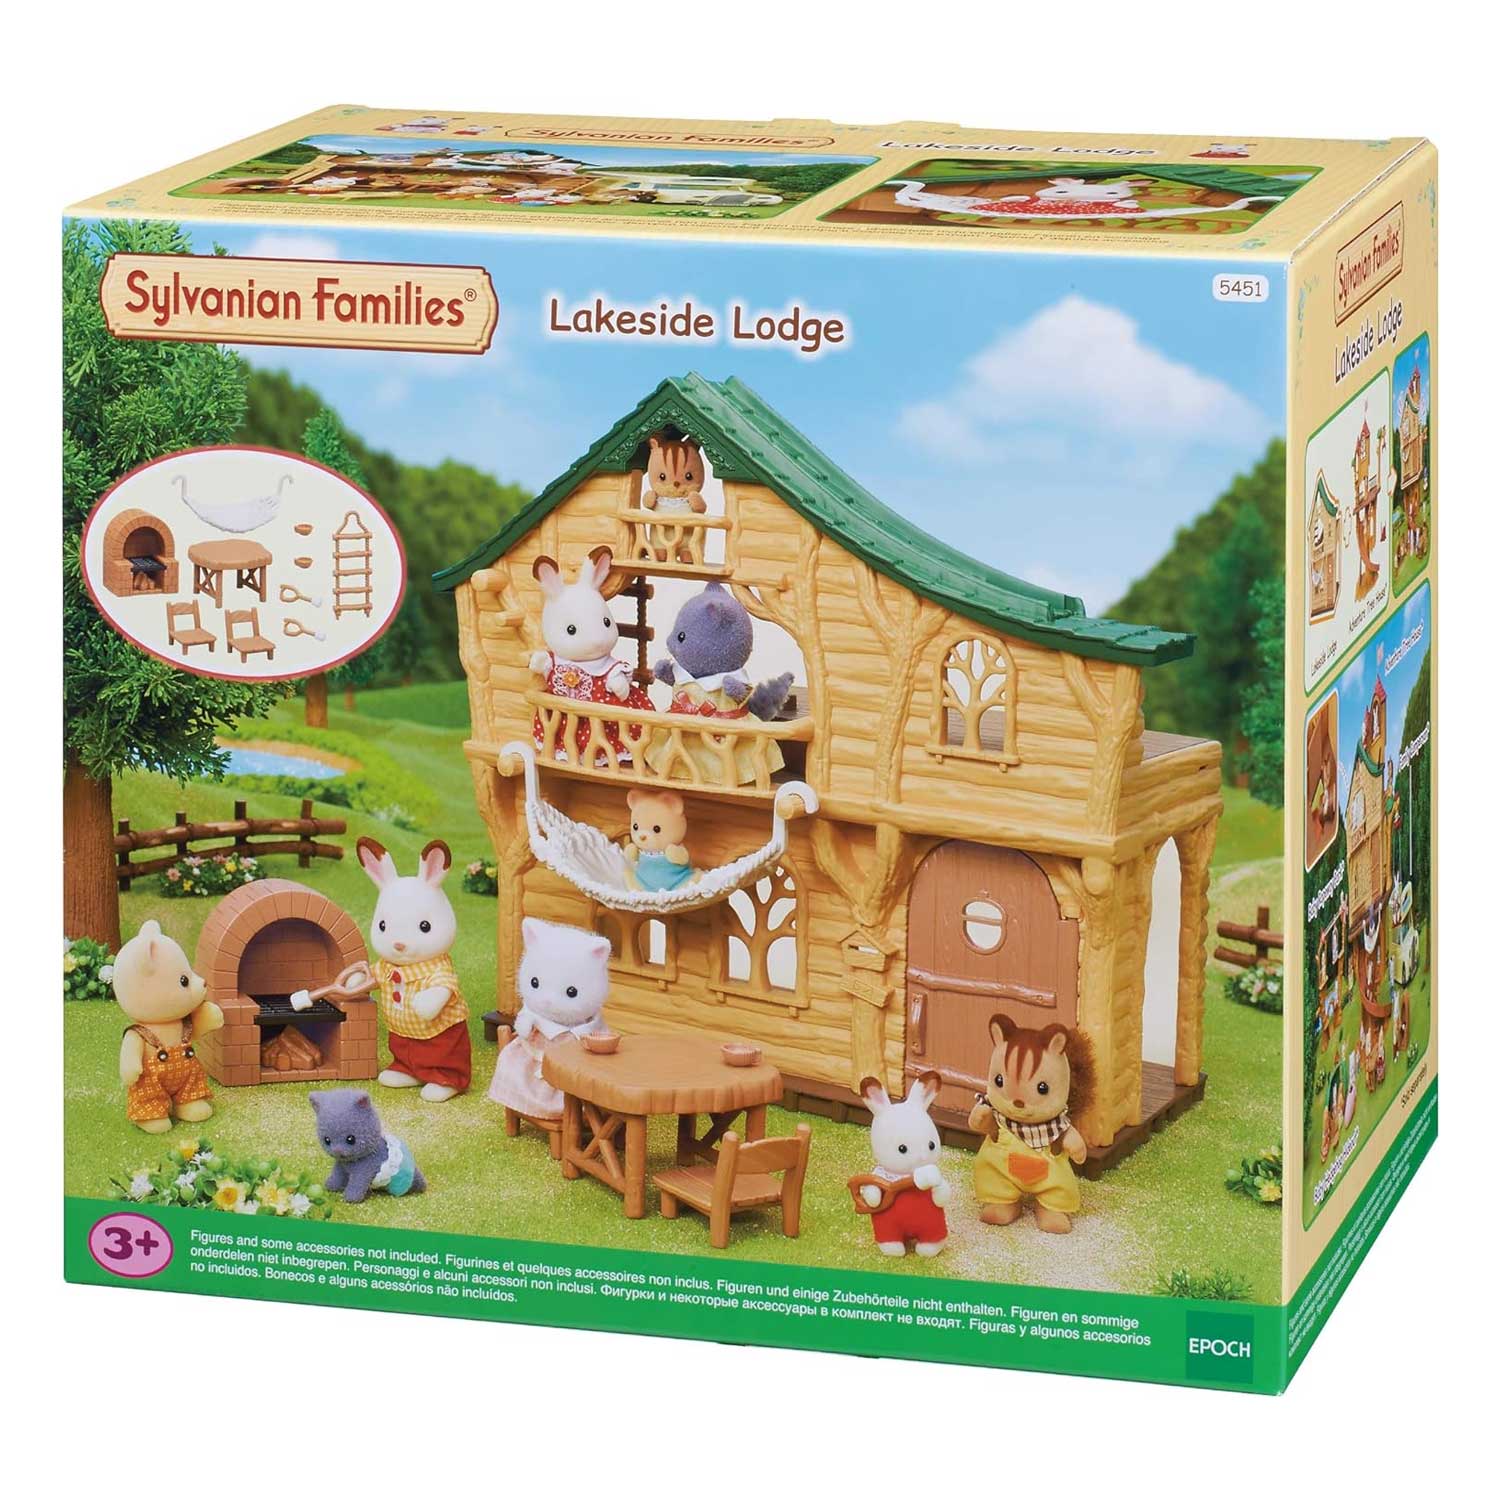 Le camping car sylvanian vehicules, figurines